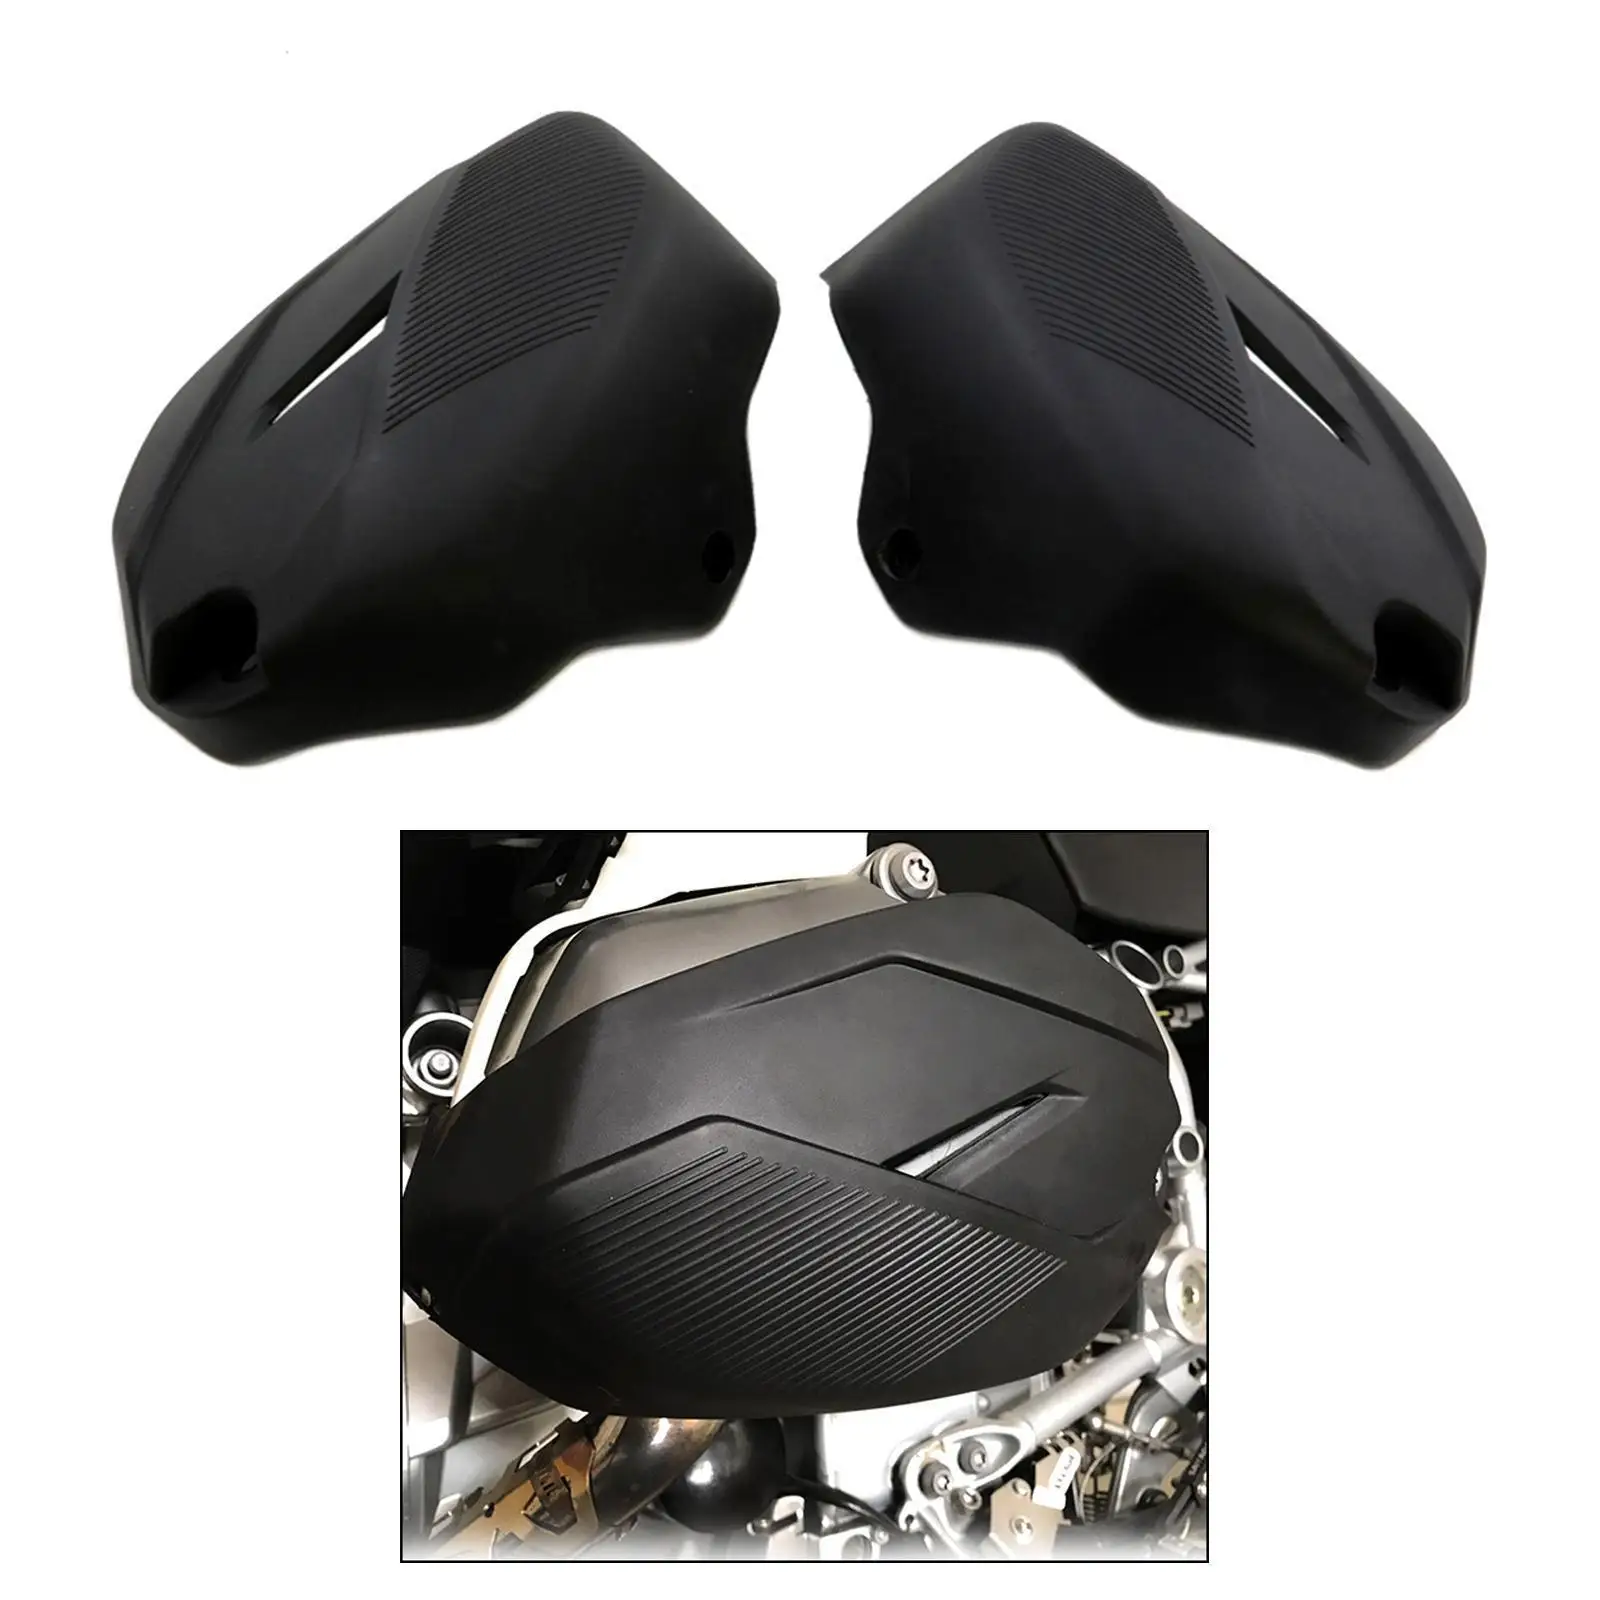 1 Pair Cylinder Head Engine Guards Protector Cover for  R1200GS LC ADV R1200R 2014-2017, Lightweight and compact design